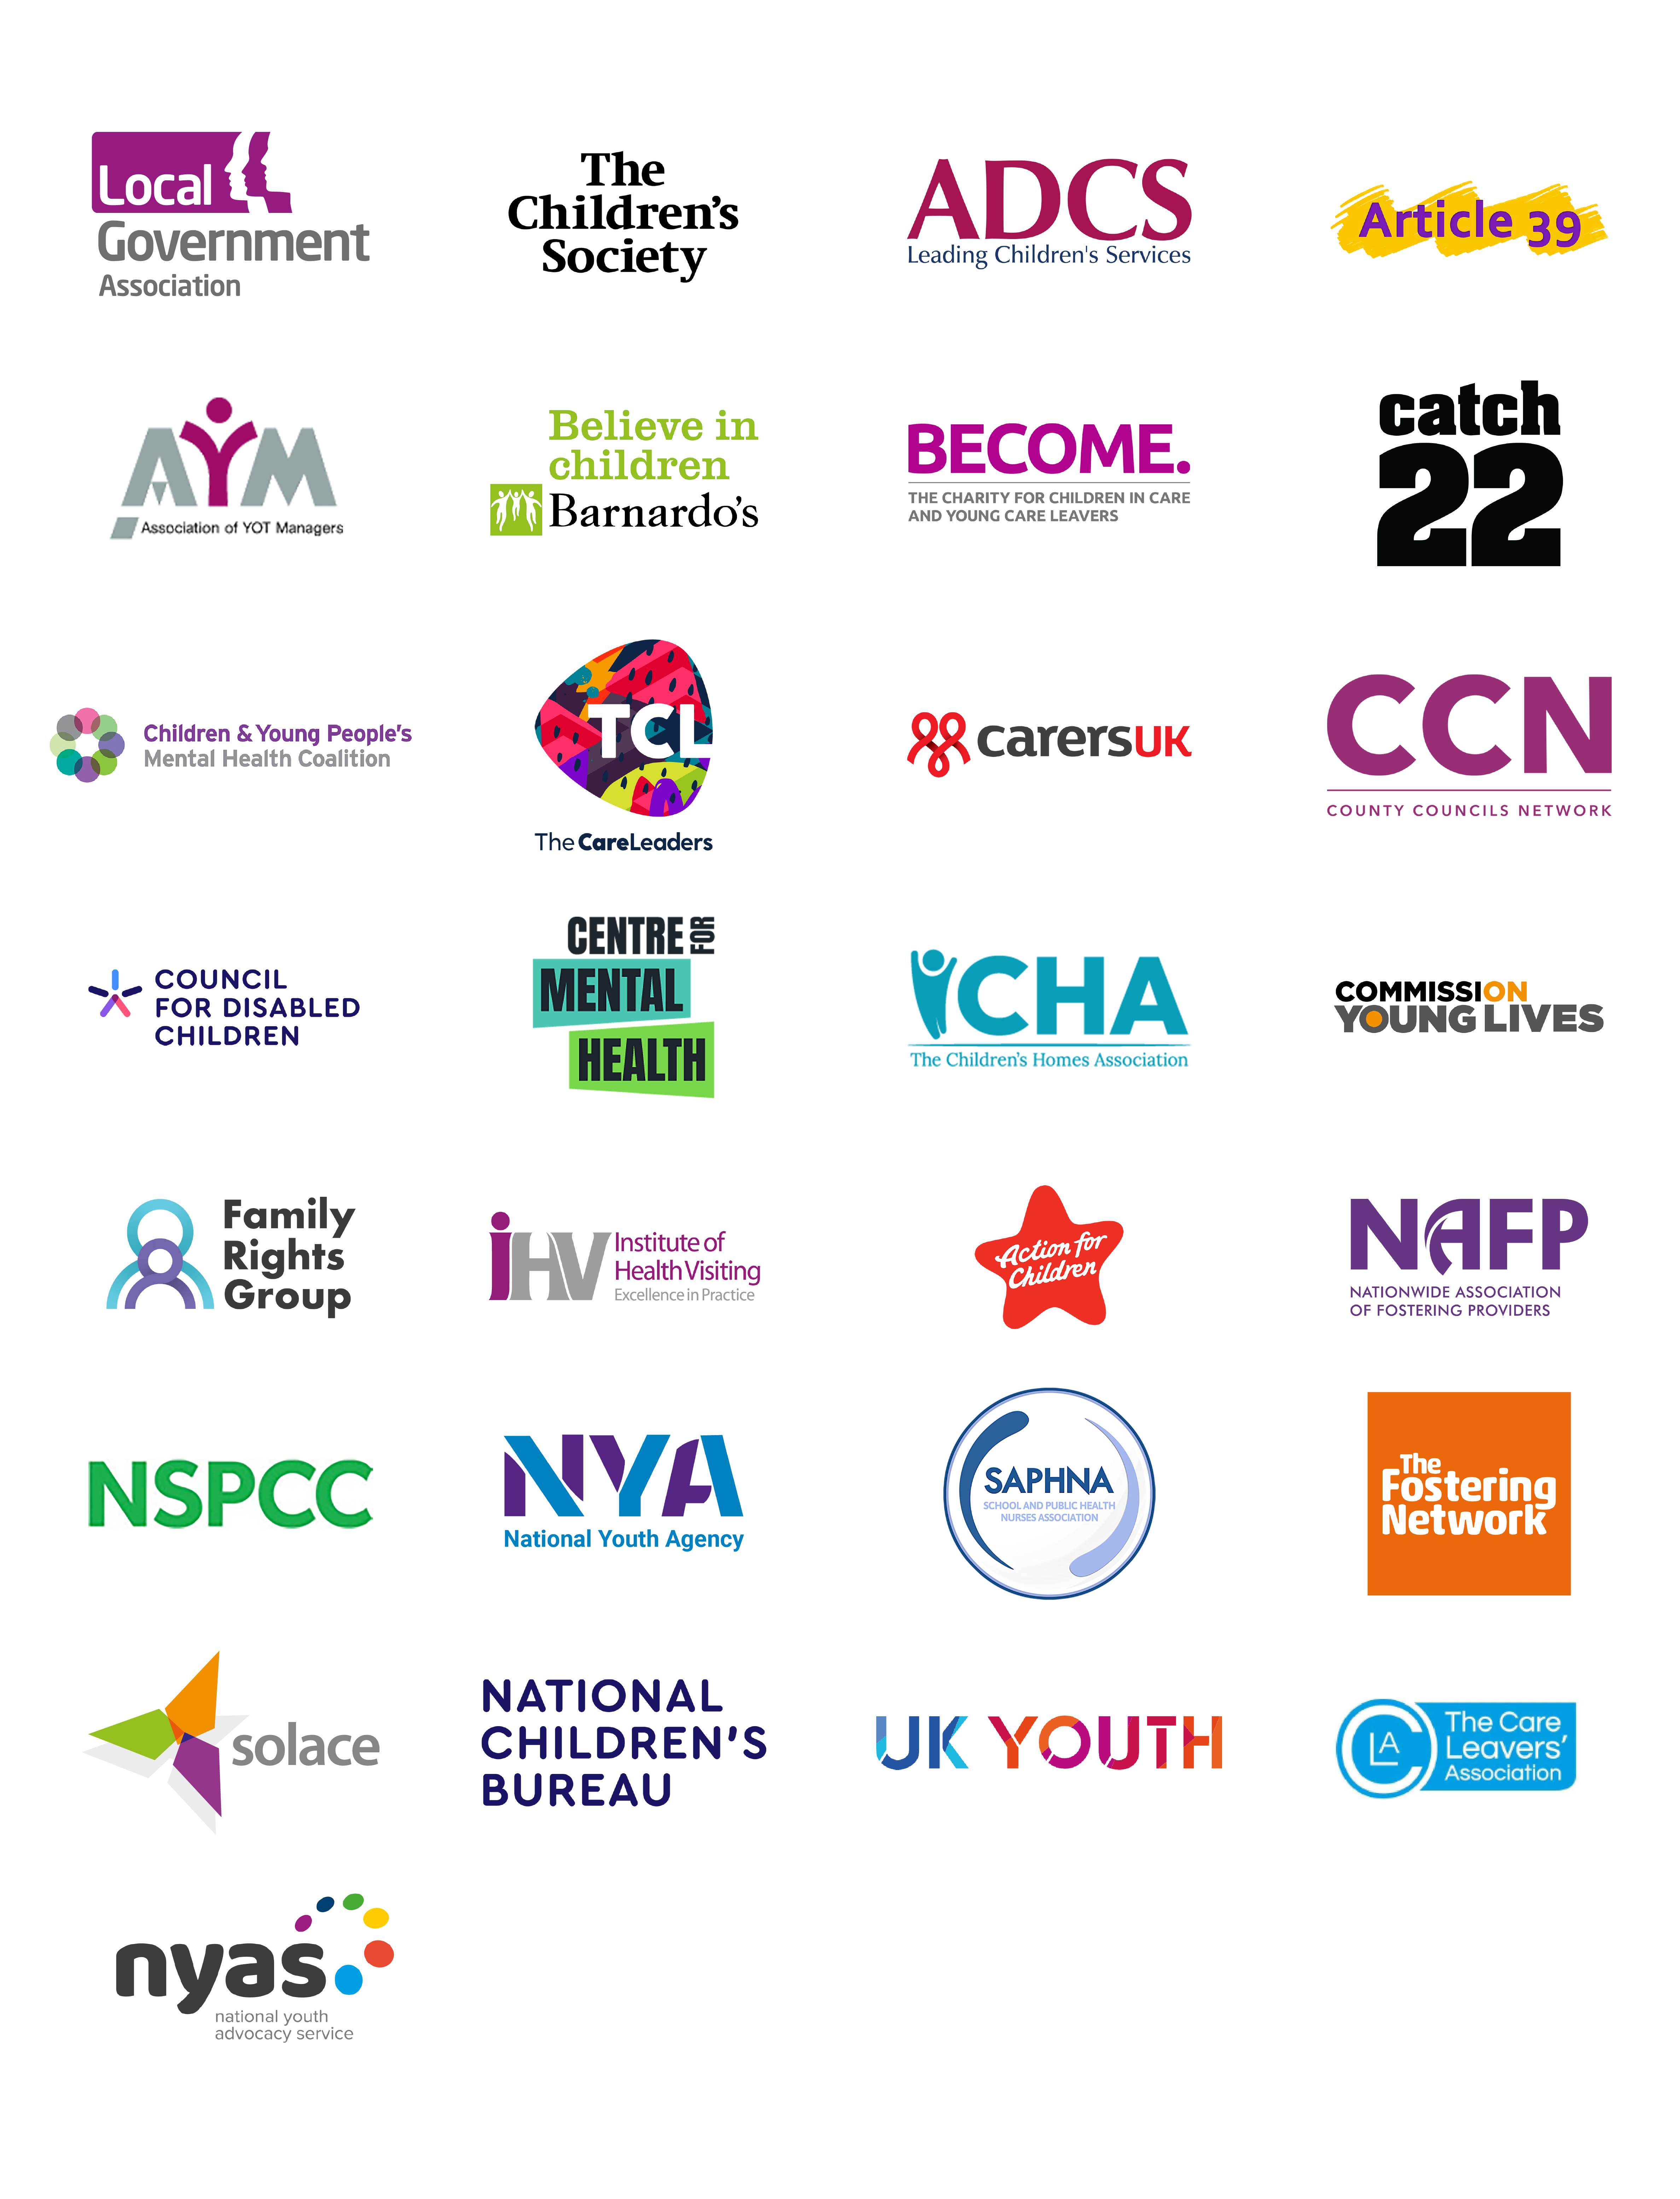 A image of the 28 organisation signatory logos of the open letter